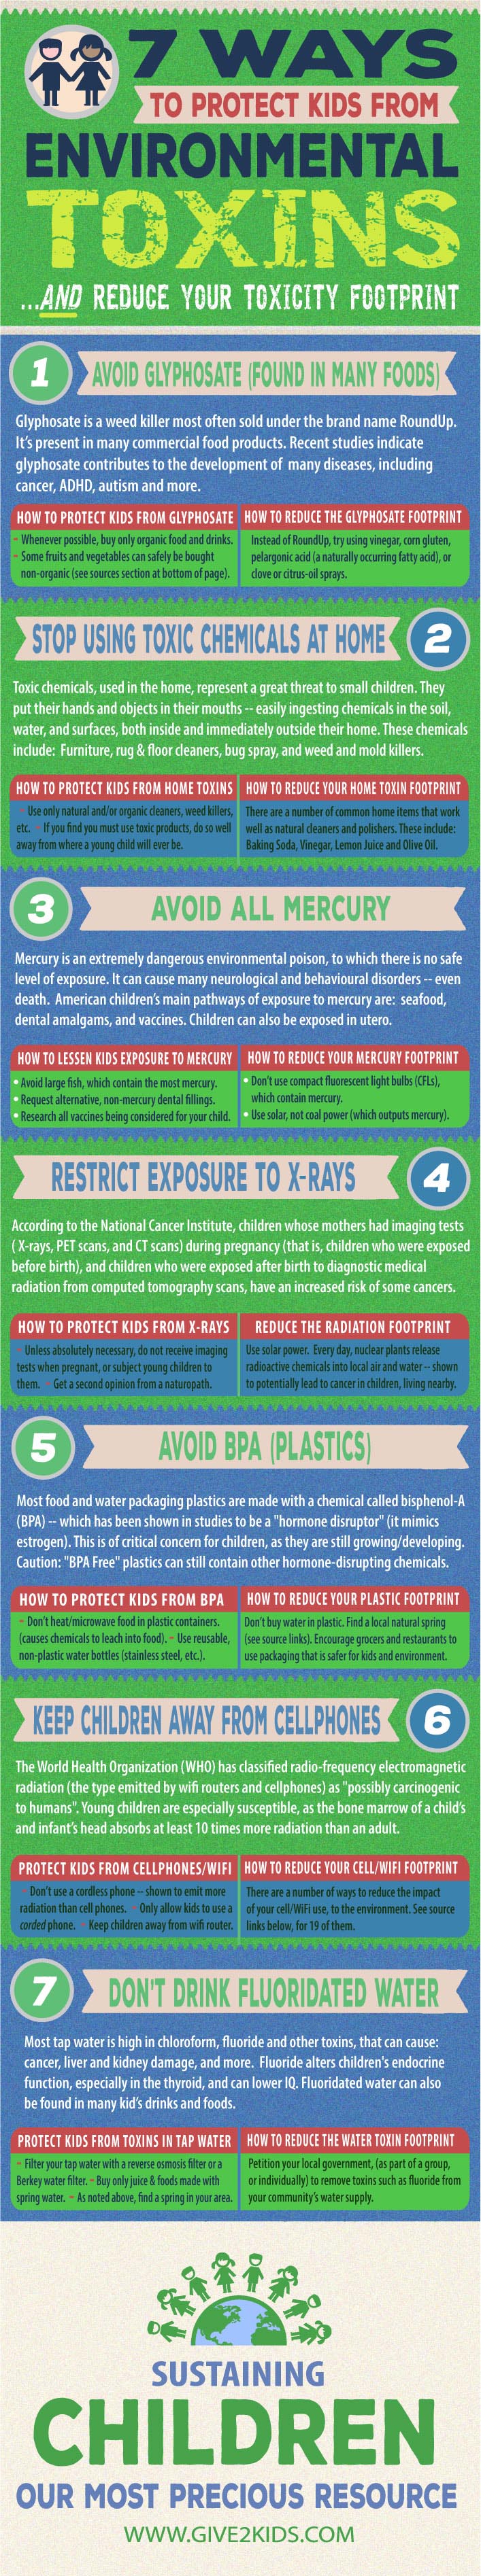 dprotect-kids-from-environmental-toxins-infographic